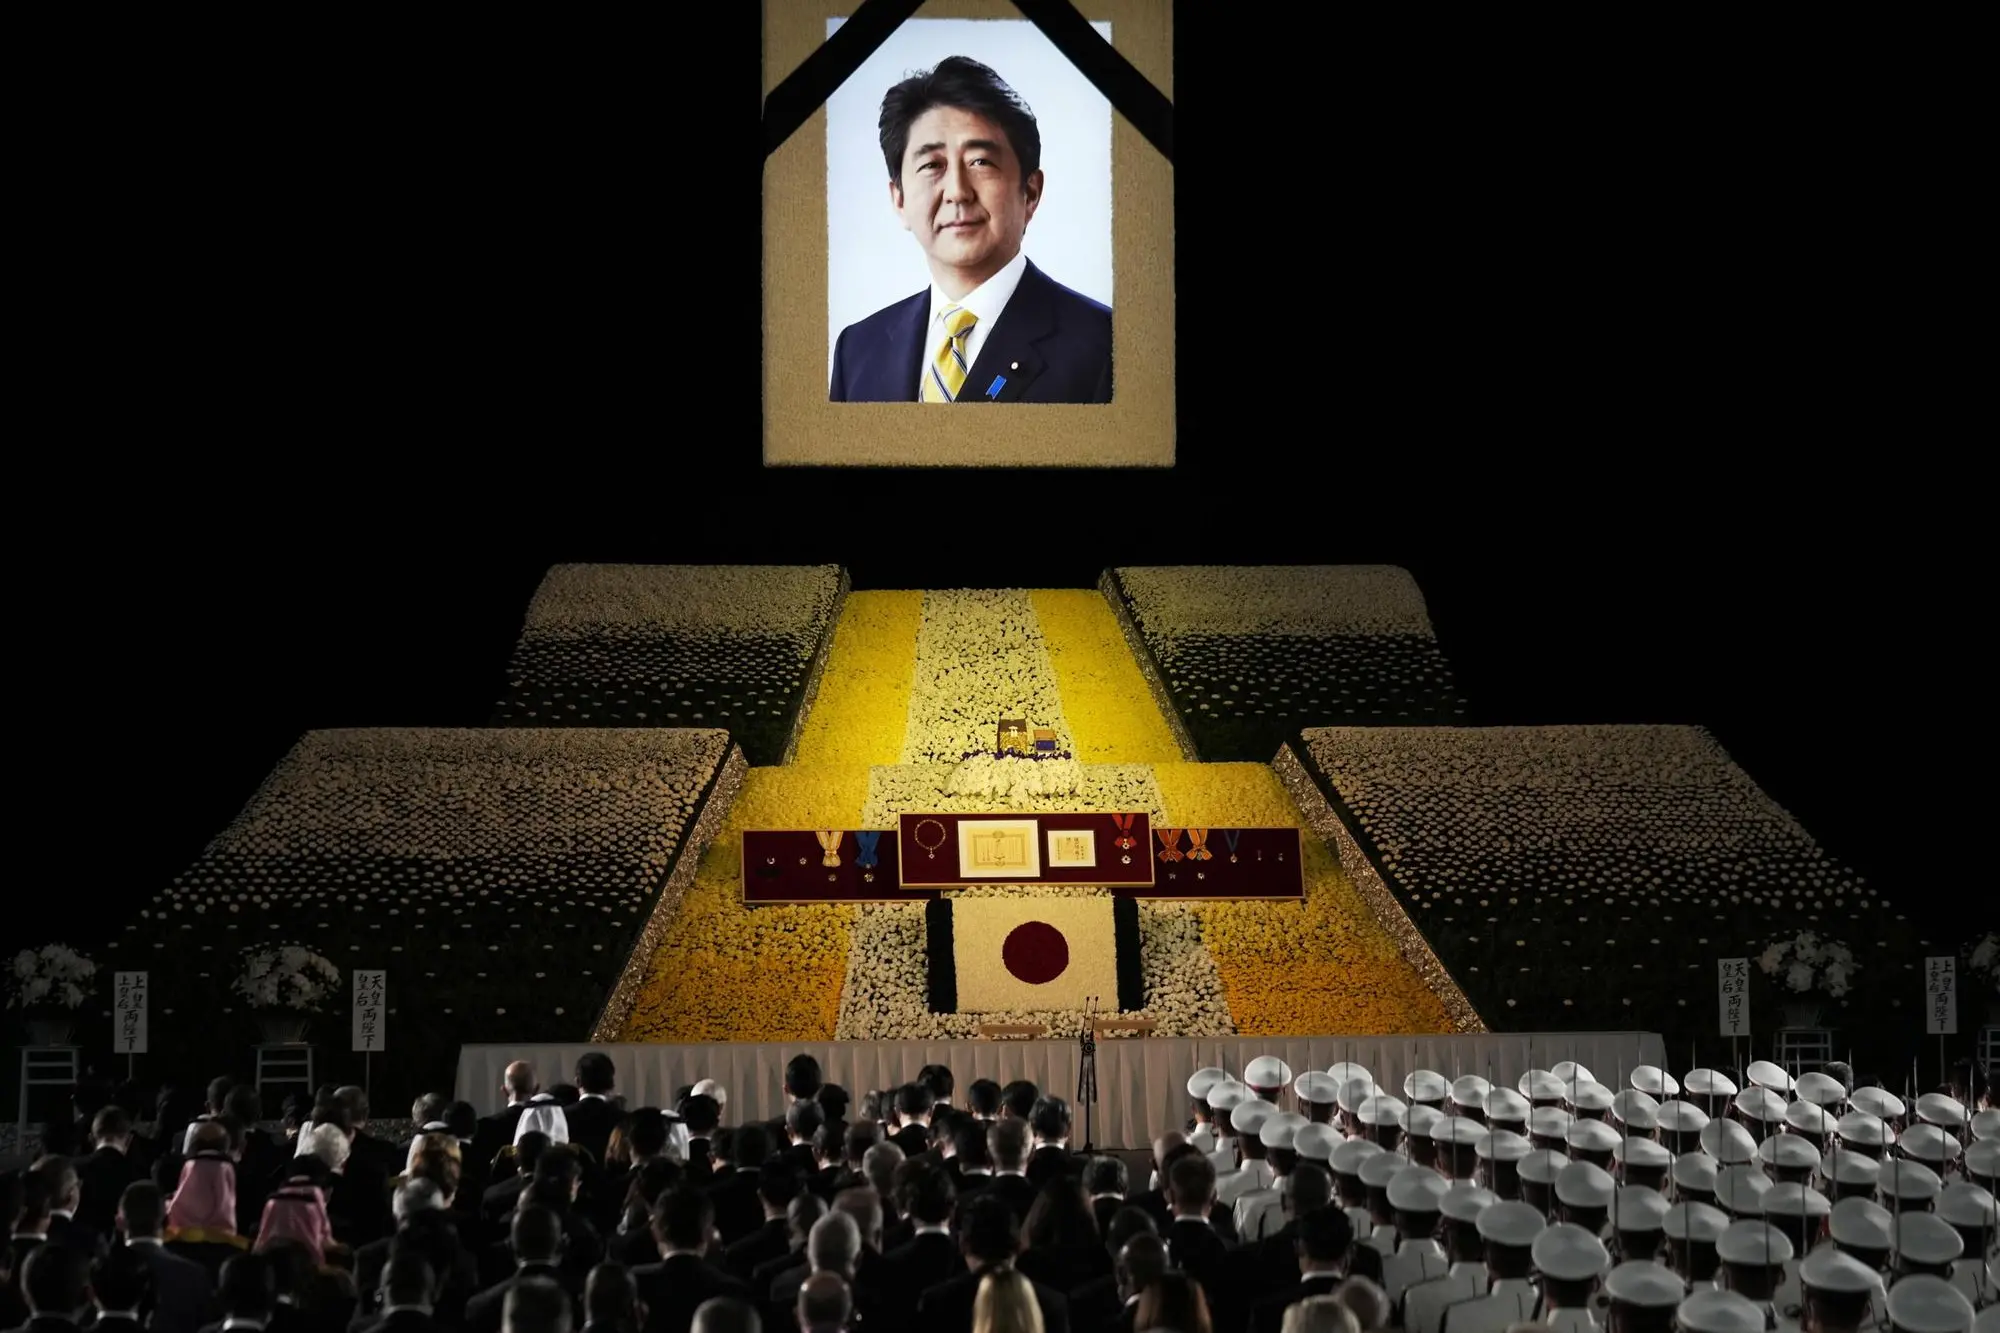 epaselect epa10208695 A portrait of former Japanese Prime Minister Shinzo Abe hangs on the stage during the state funeral of former Japanese Prime Minister Shinzo Abe at Nippon Budokan in Tokyo, Japan, 27 September 2022. Thousands of people are gathered in Tokyo to attend the state funeral for former prime minister Shinzo Abe, including foreign dignitaries and representatives from more than 200 countries and international organizations. EPA/FRANCK ROBICHON / POOL